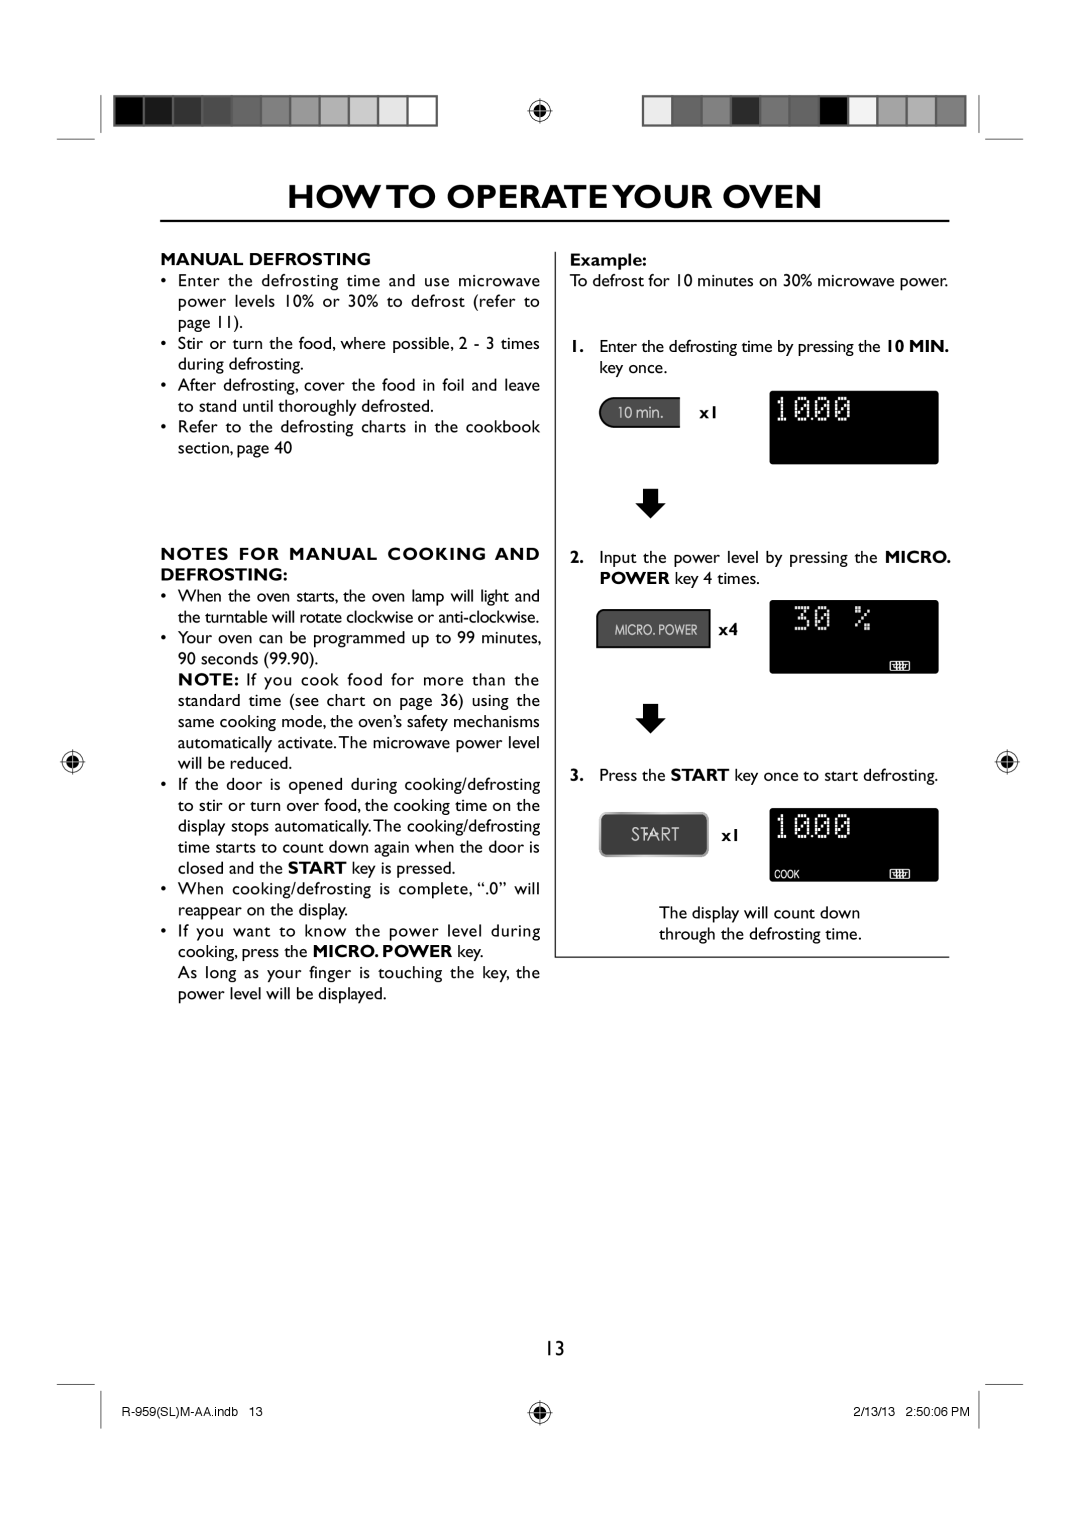 Sharp R-959(SL)M-AA manual How To Operateyour Oven, Manual Defrosting, Notes For Manual Cooking And Defrosting, Example 